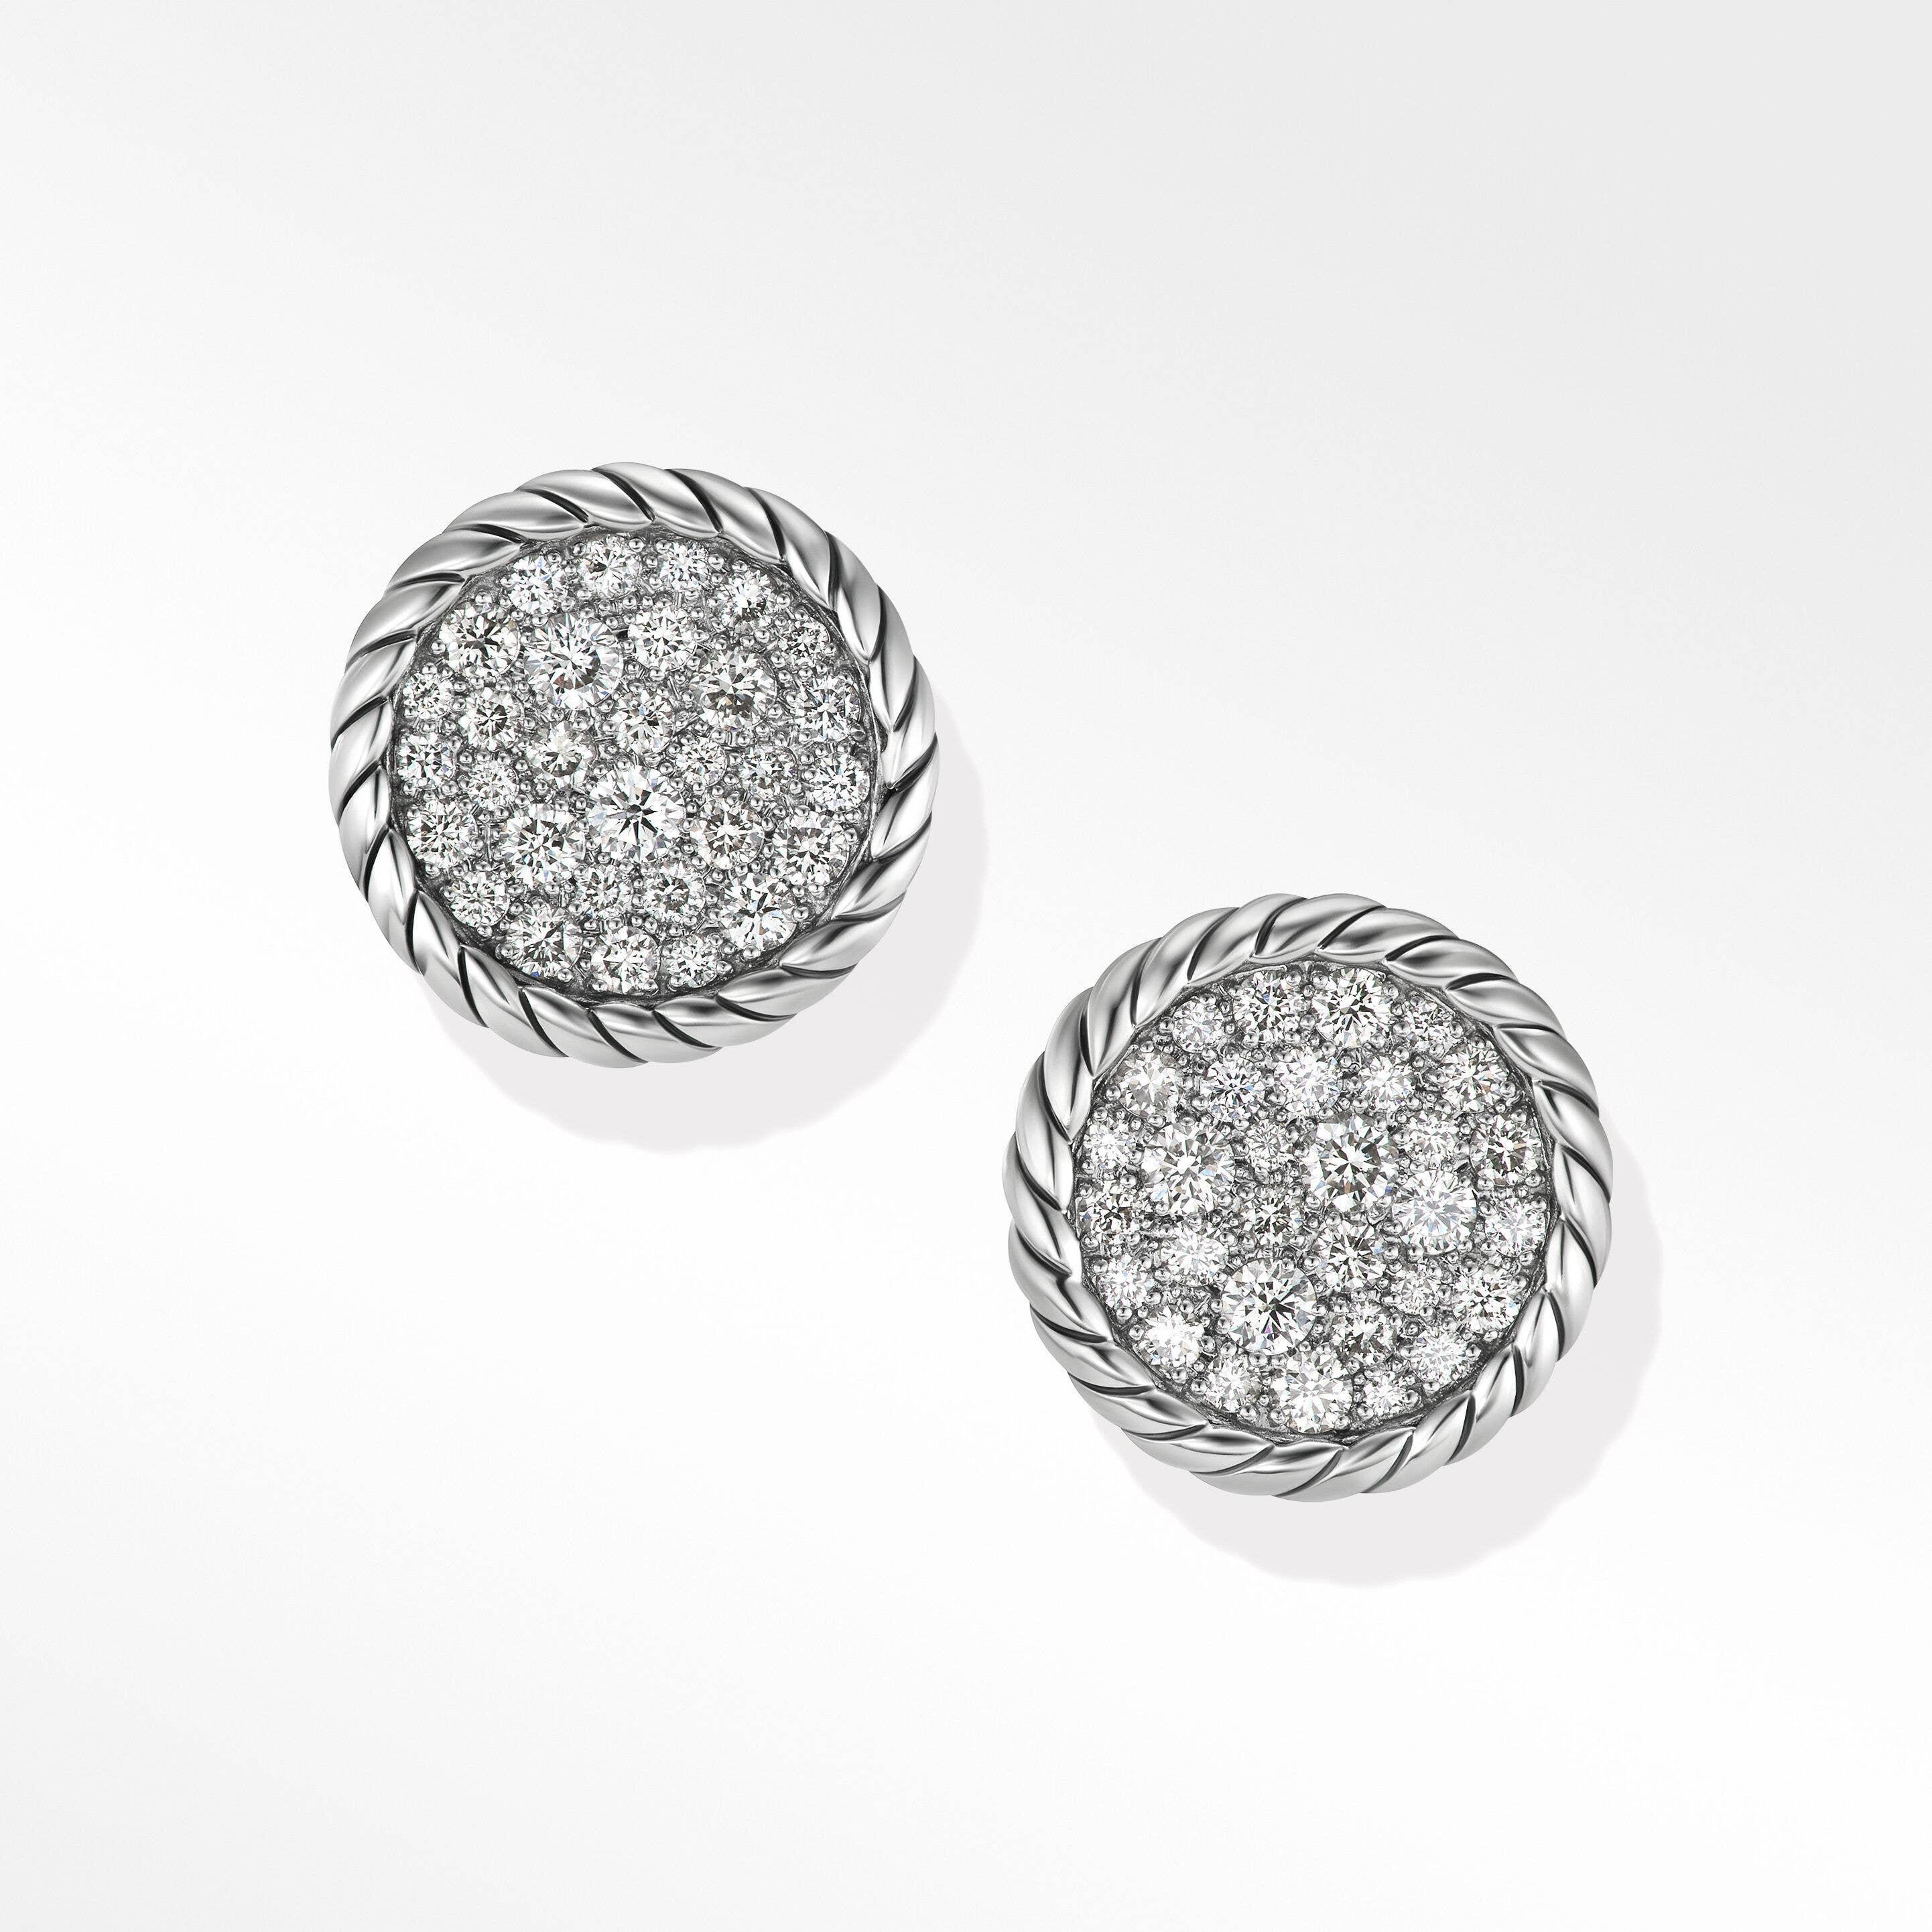 DY Elements® Button Stud Earrings in Sterling Silver with Pavé Diamonds